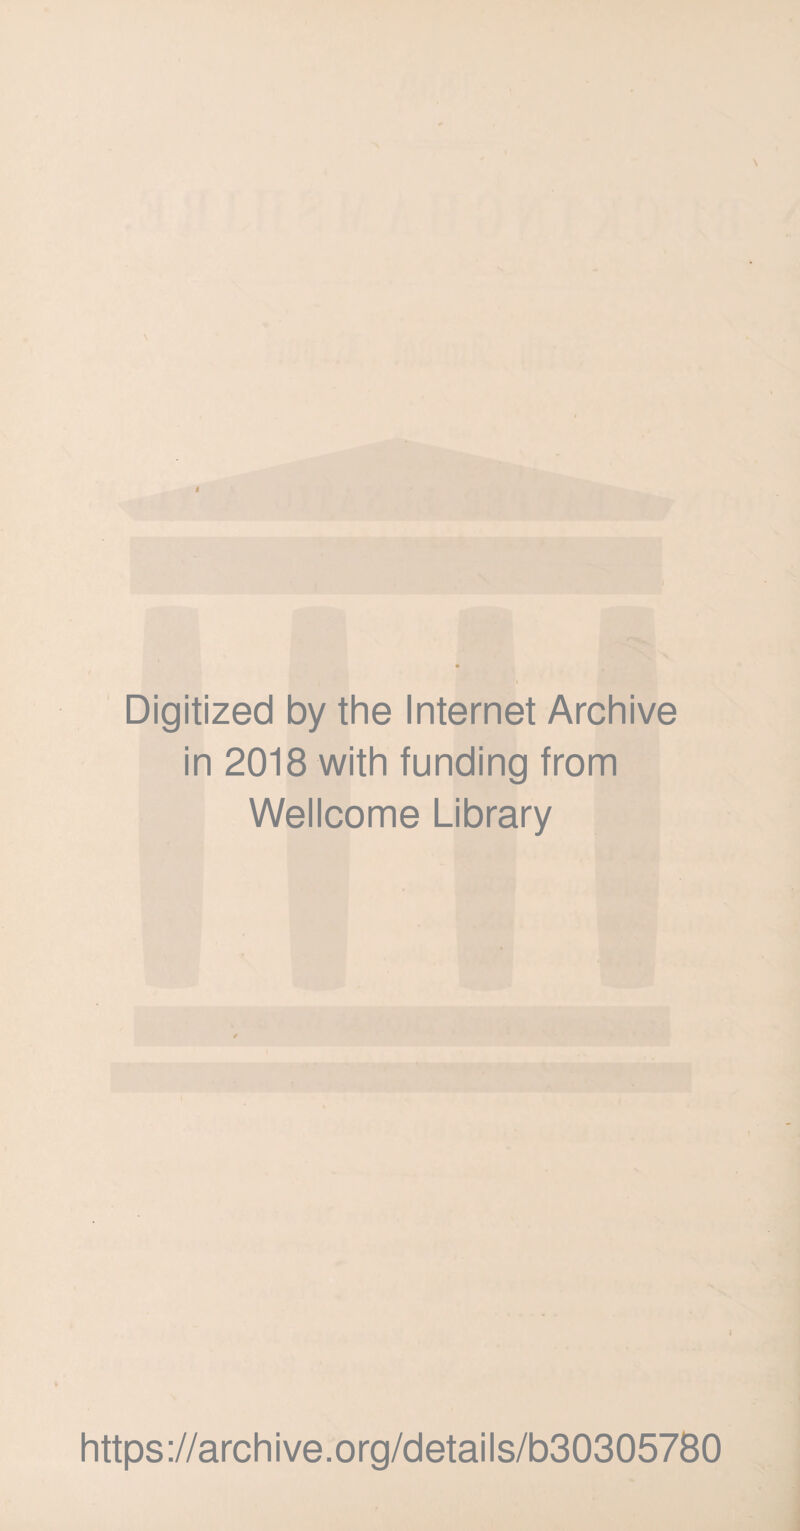 Digitized by the Internet Archive in 2018 with funding from Wellcome Library https://archive.org/details/b30305780